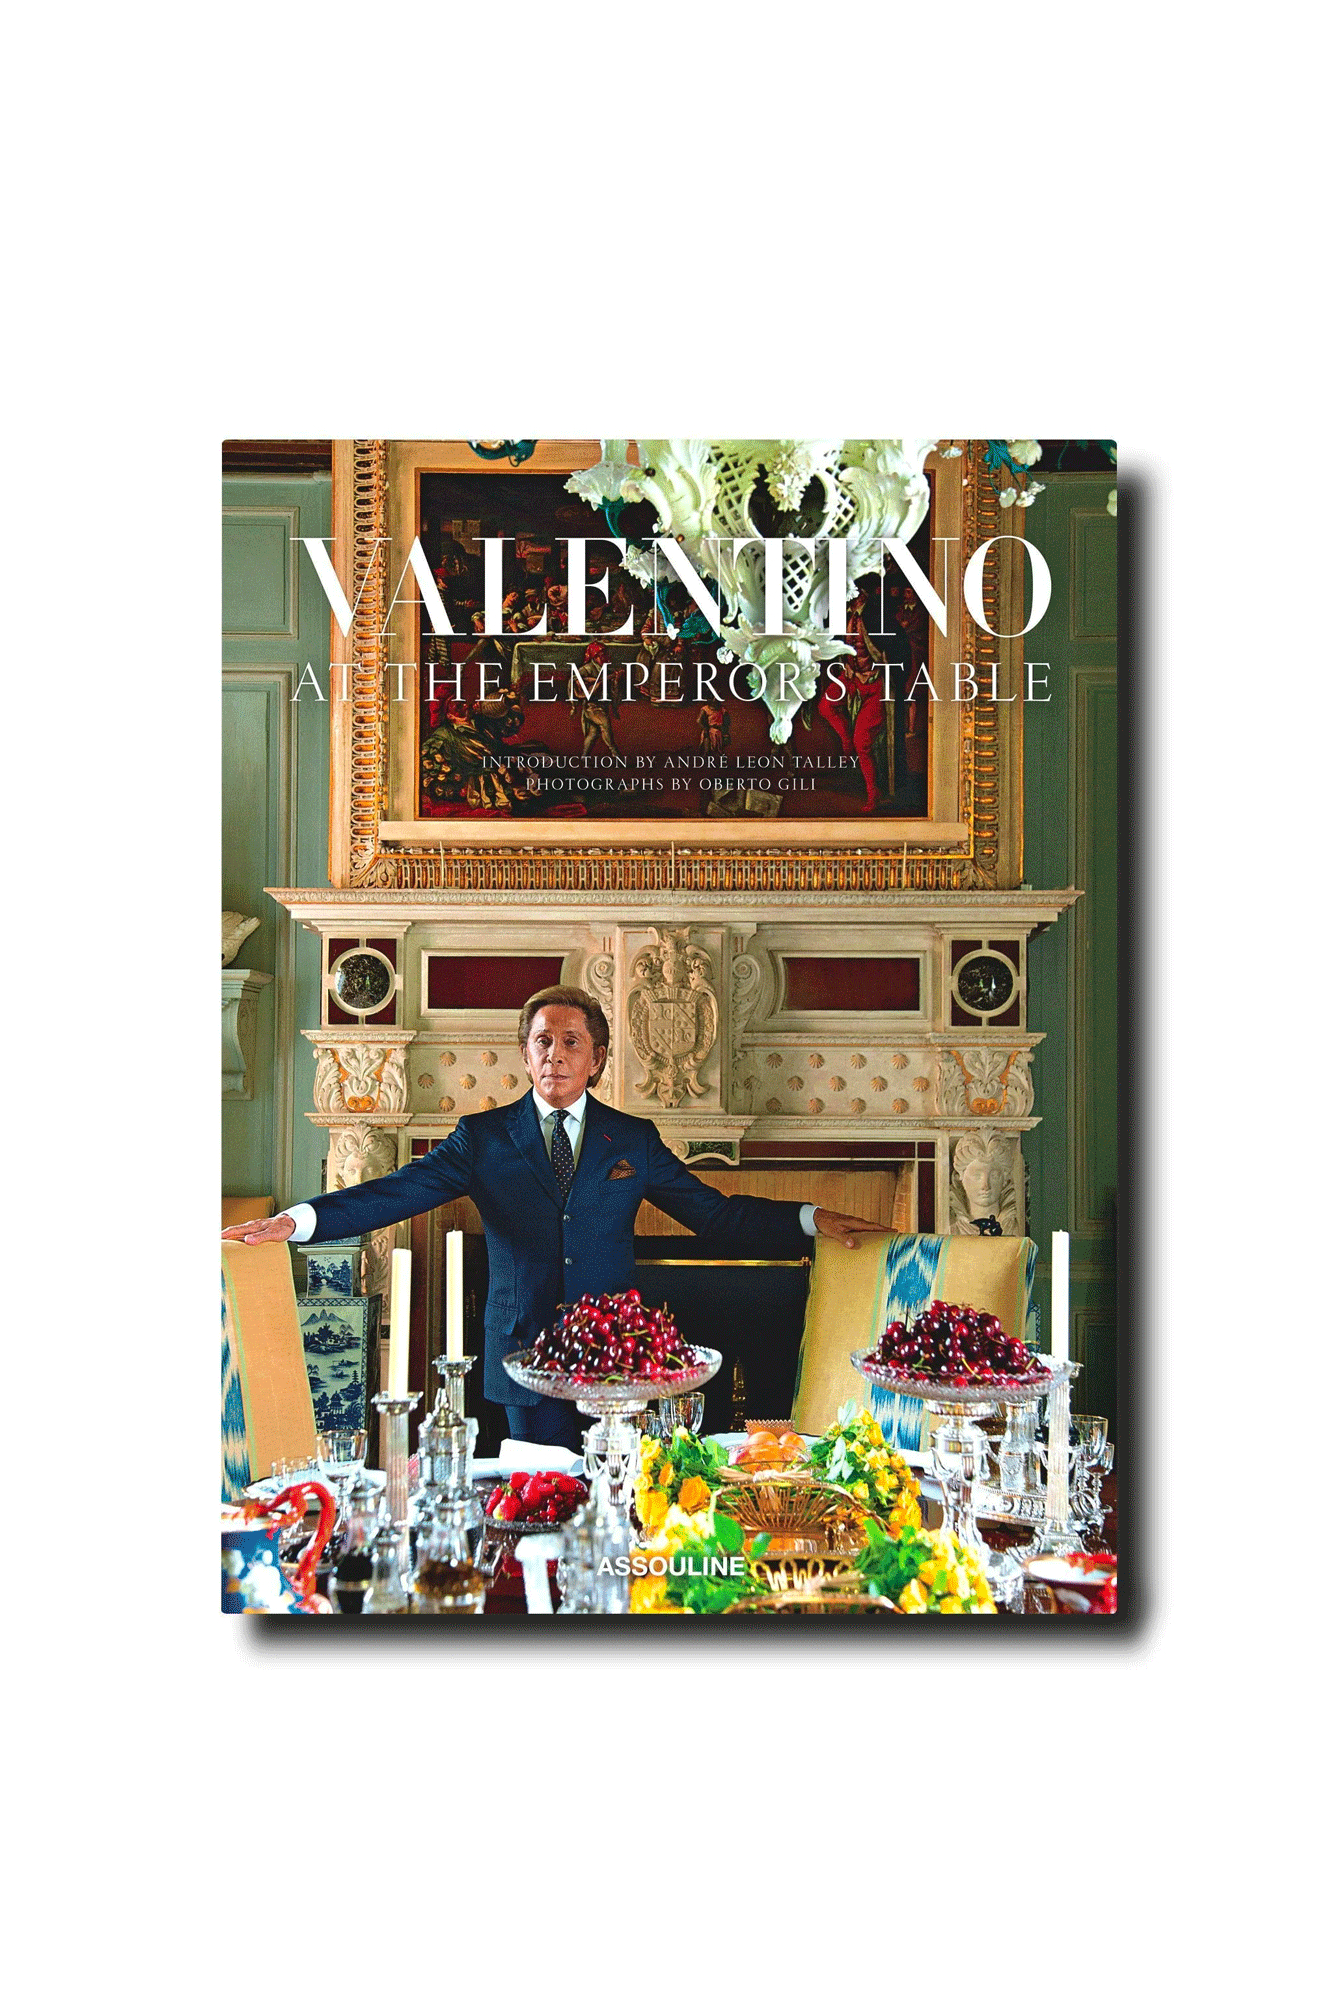 Valentino: At the Emperor's Table presents Valentino's passion for both beauty and entertaining. Written by fashion editor André Leon Talley and featuring Valentino's own words, this book will show you how to create a memorable experience for your guests, as only the fashion maestro Valentino can. Learn the art of high-fashion hosting, and bring unforgettable joy to your gatherings.